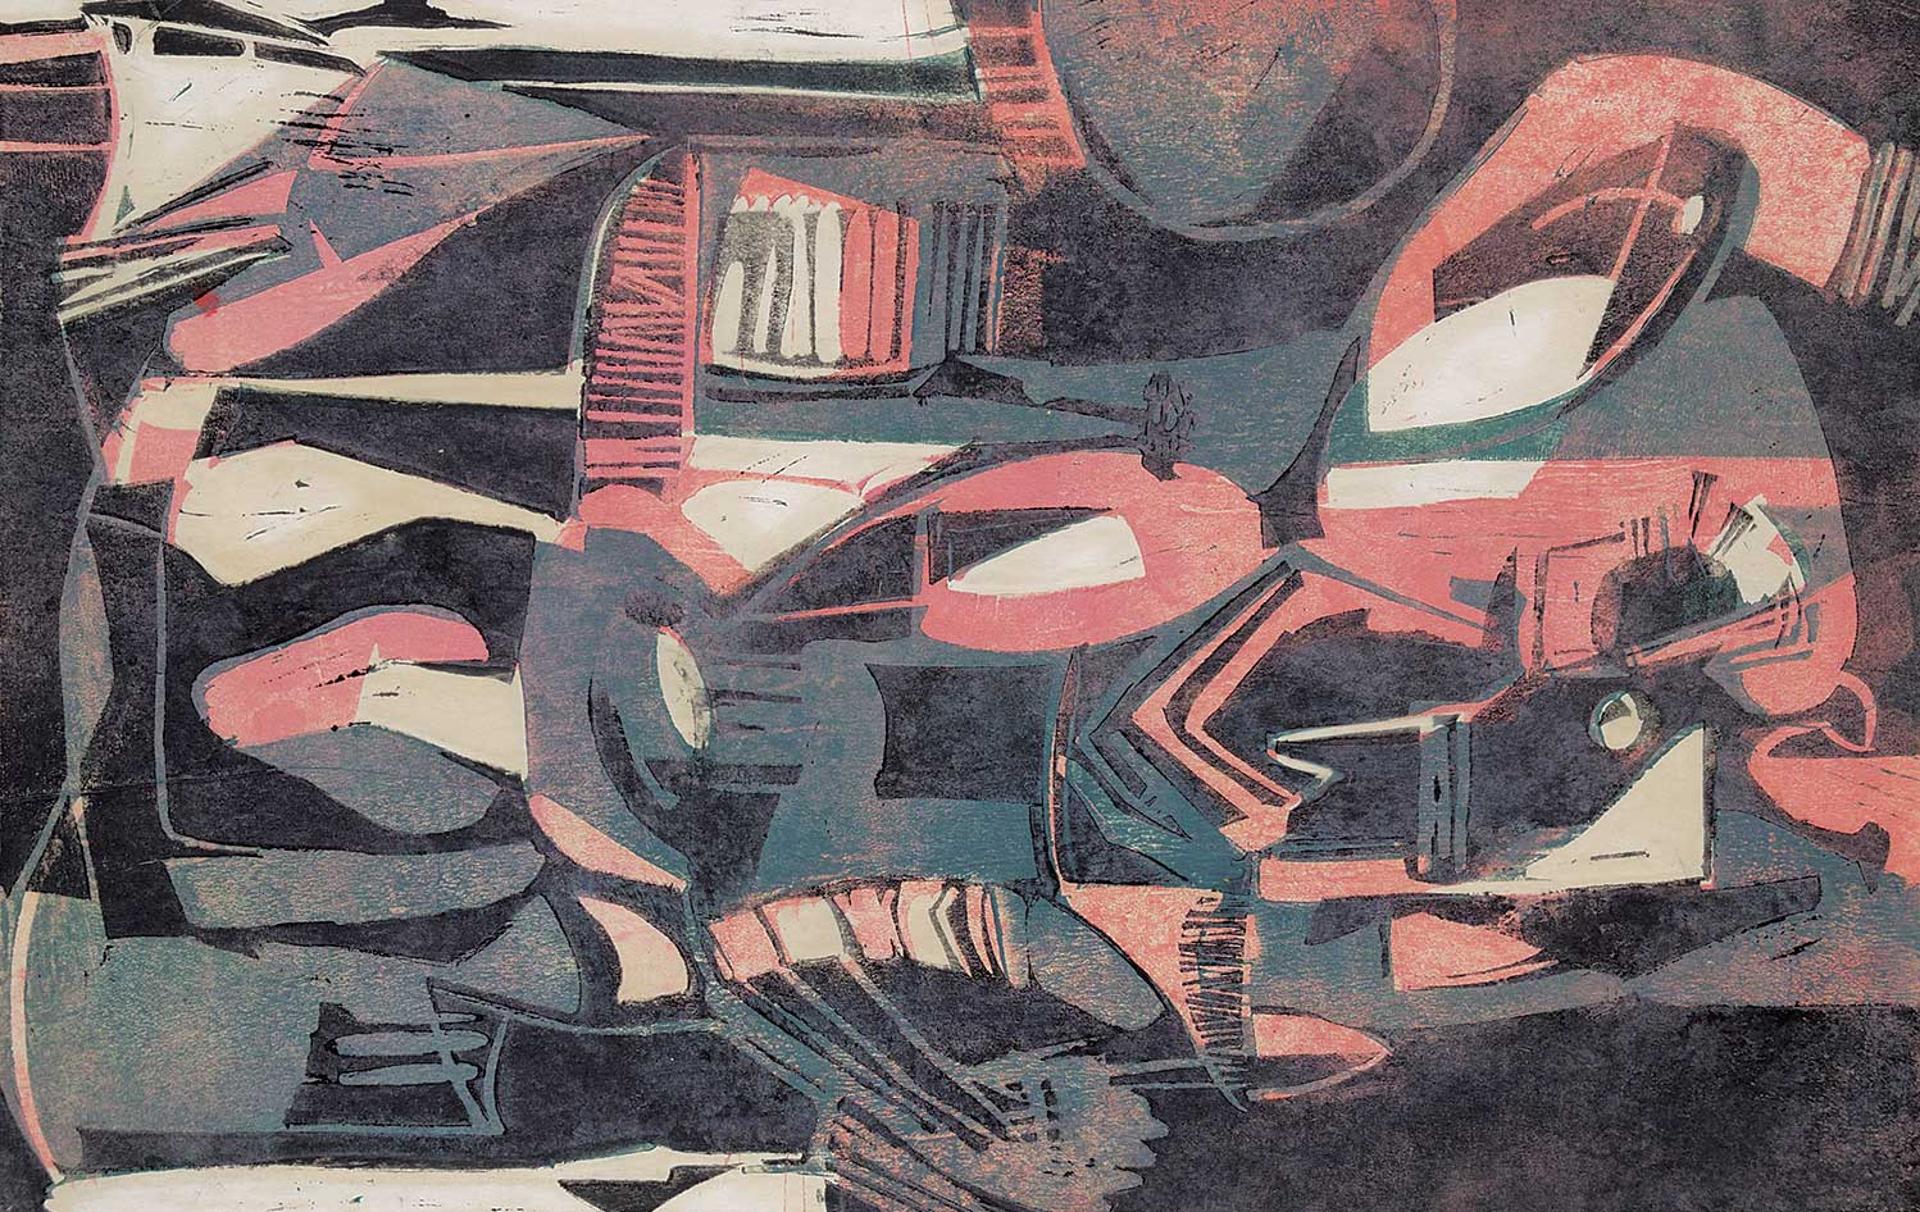 Leslie (Les) Frederick Graff (1936-2022) - Untitled - Pink and Black Abstract